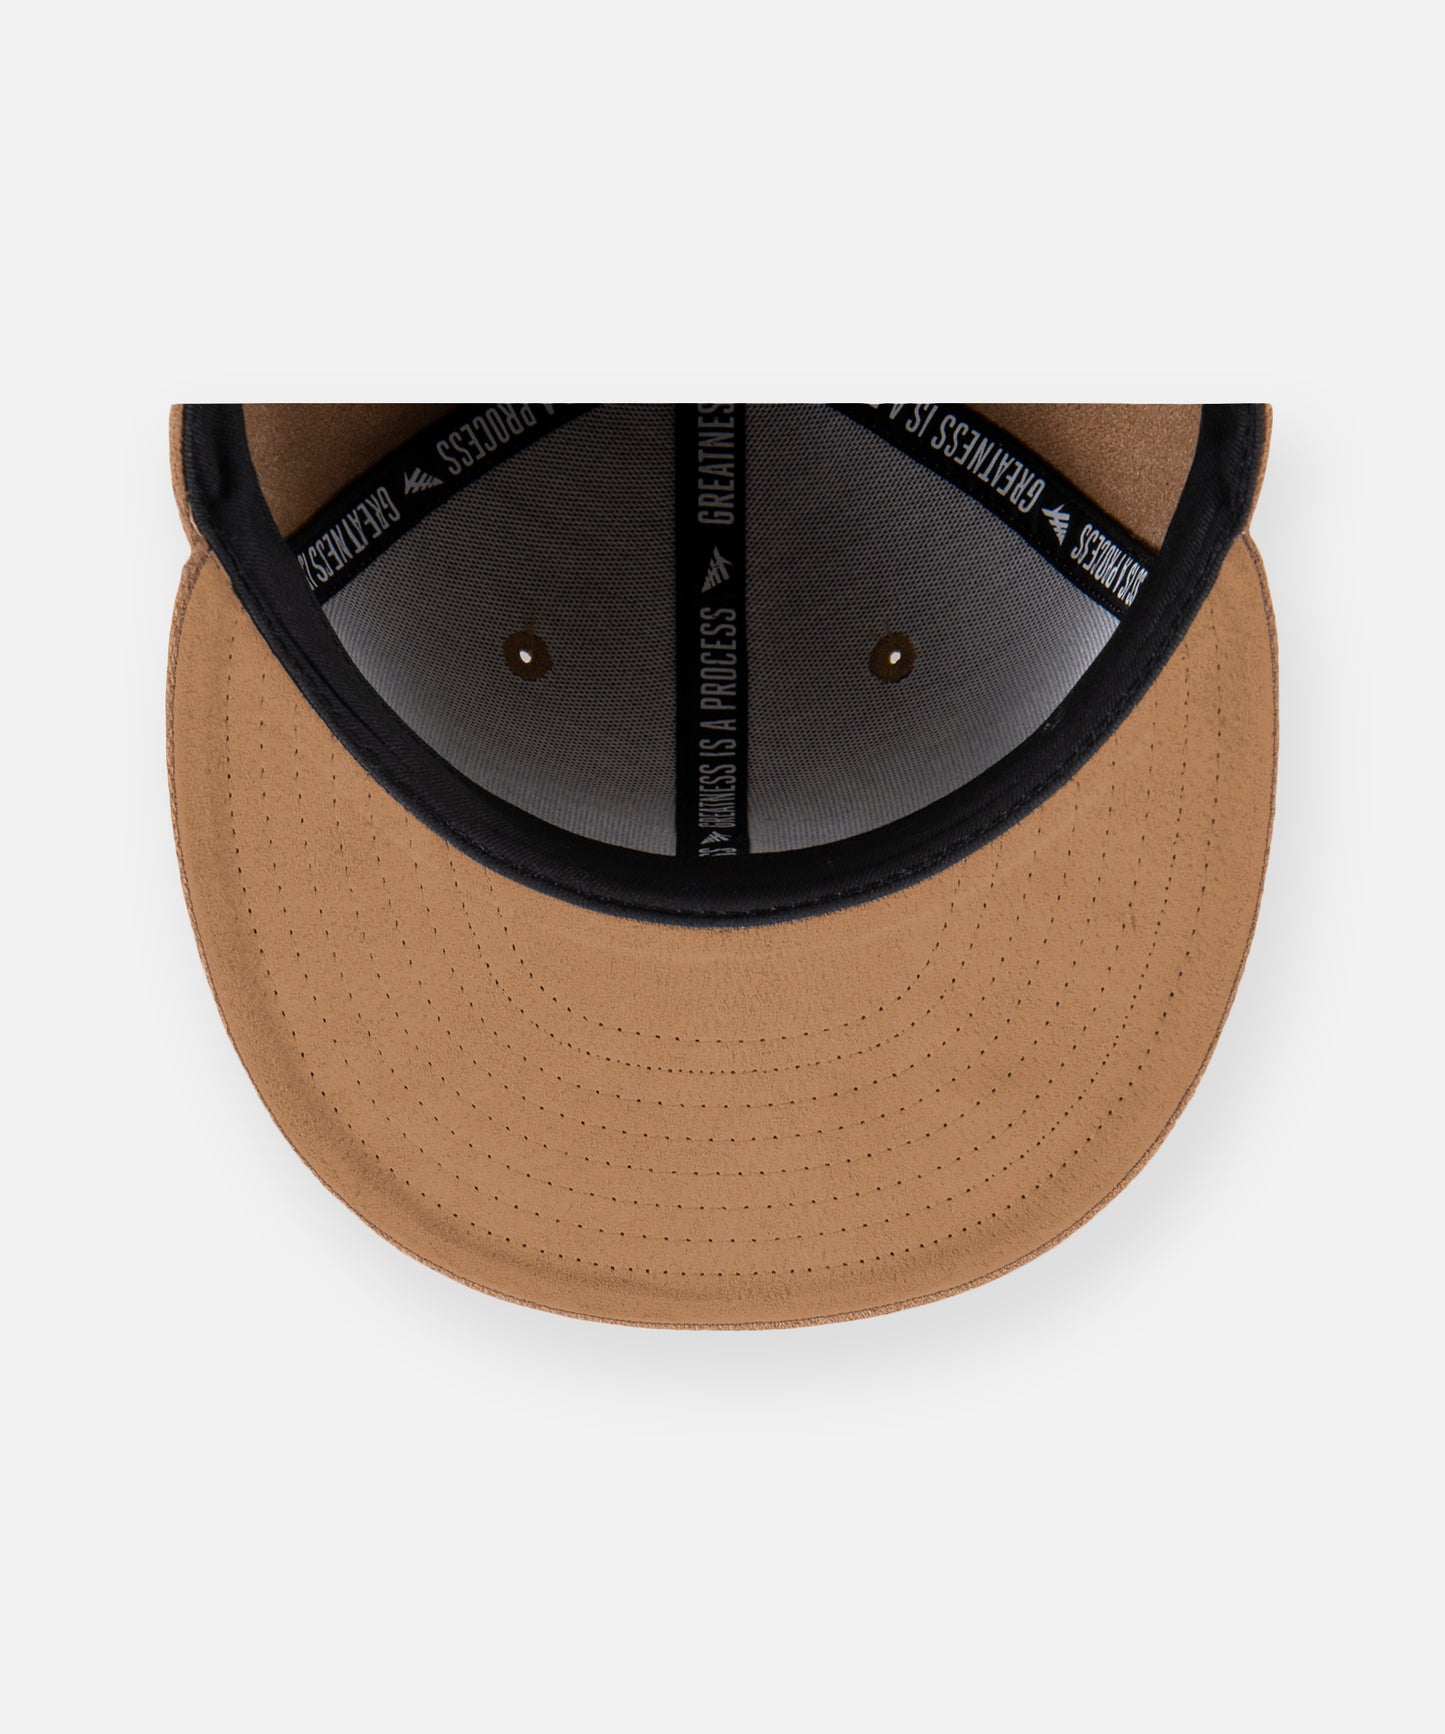 CUSTOM_ALT_TEXT: Camel faux suede undervisor on Paper Planes Wool Melton Crown 9Fifty Leather Strapback Hat, color Camel.